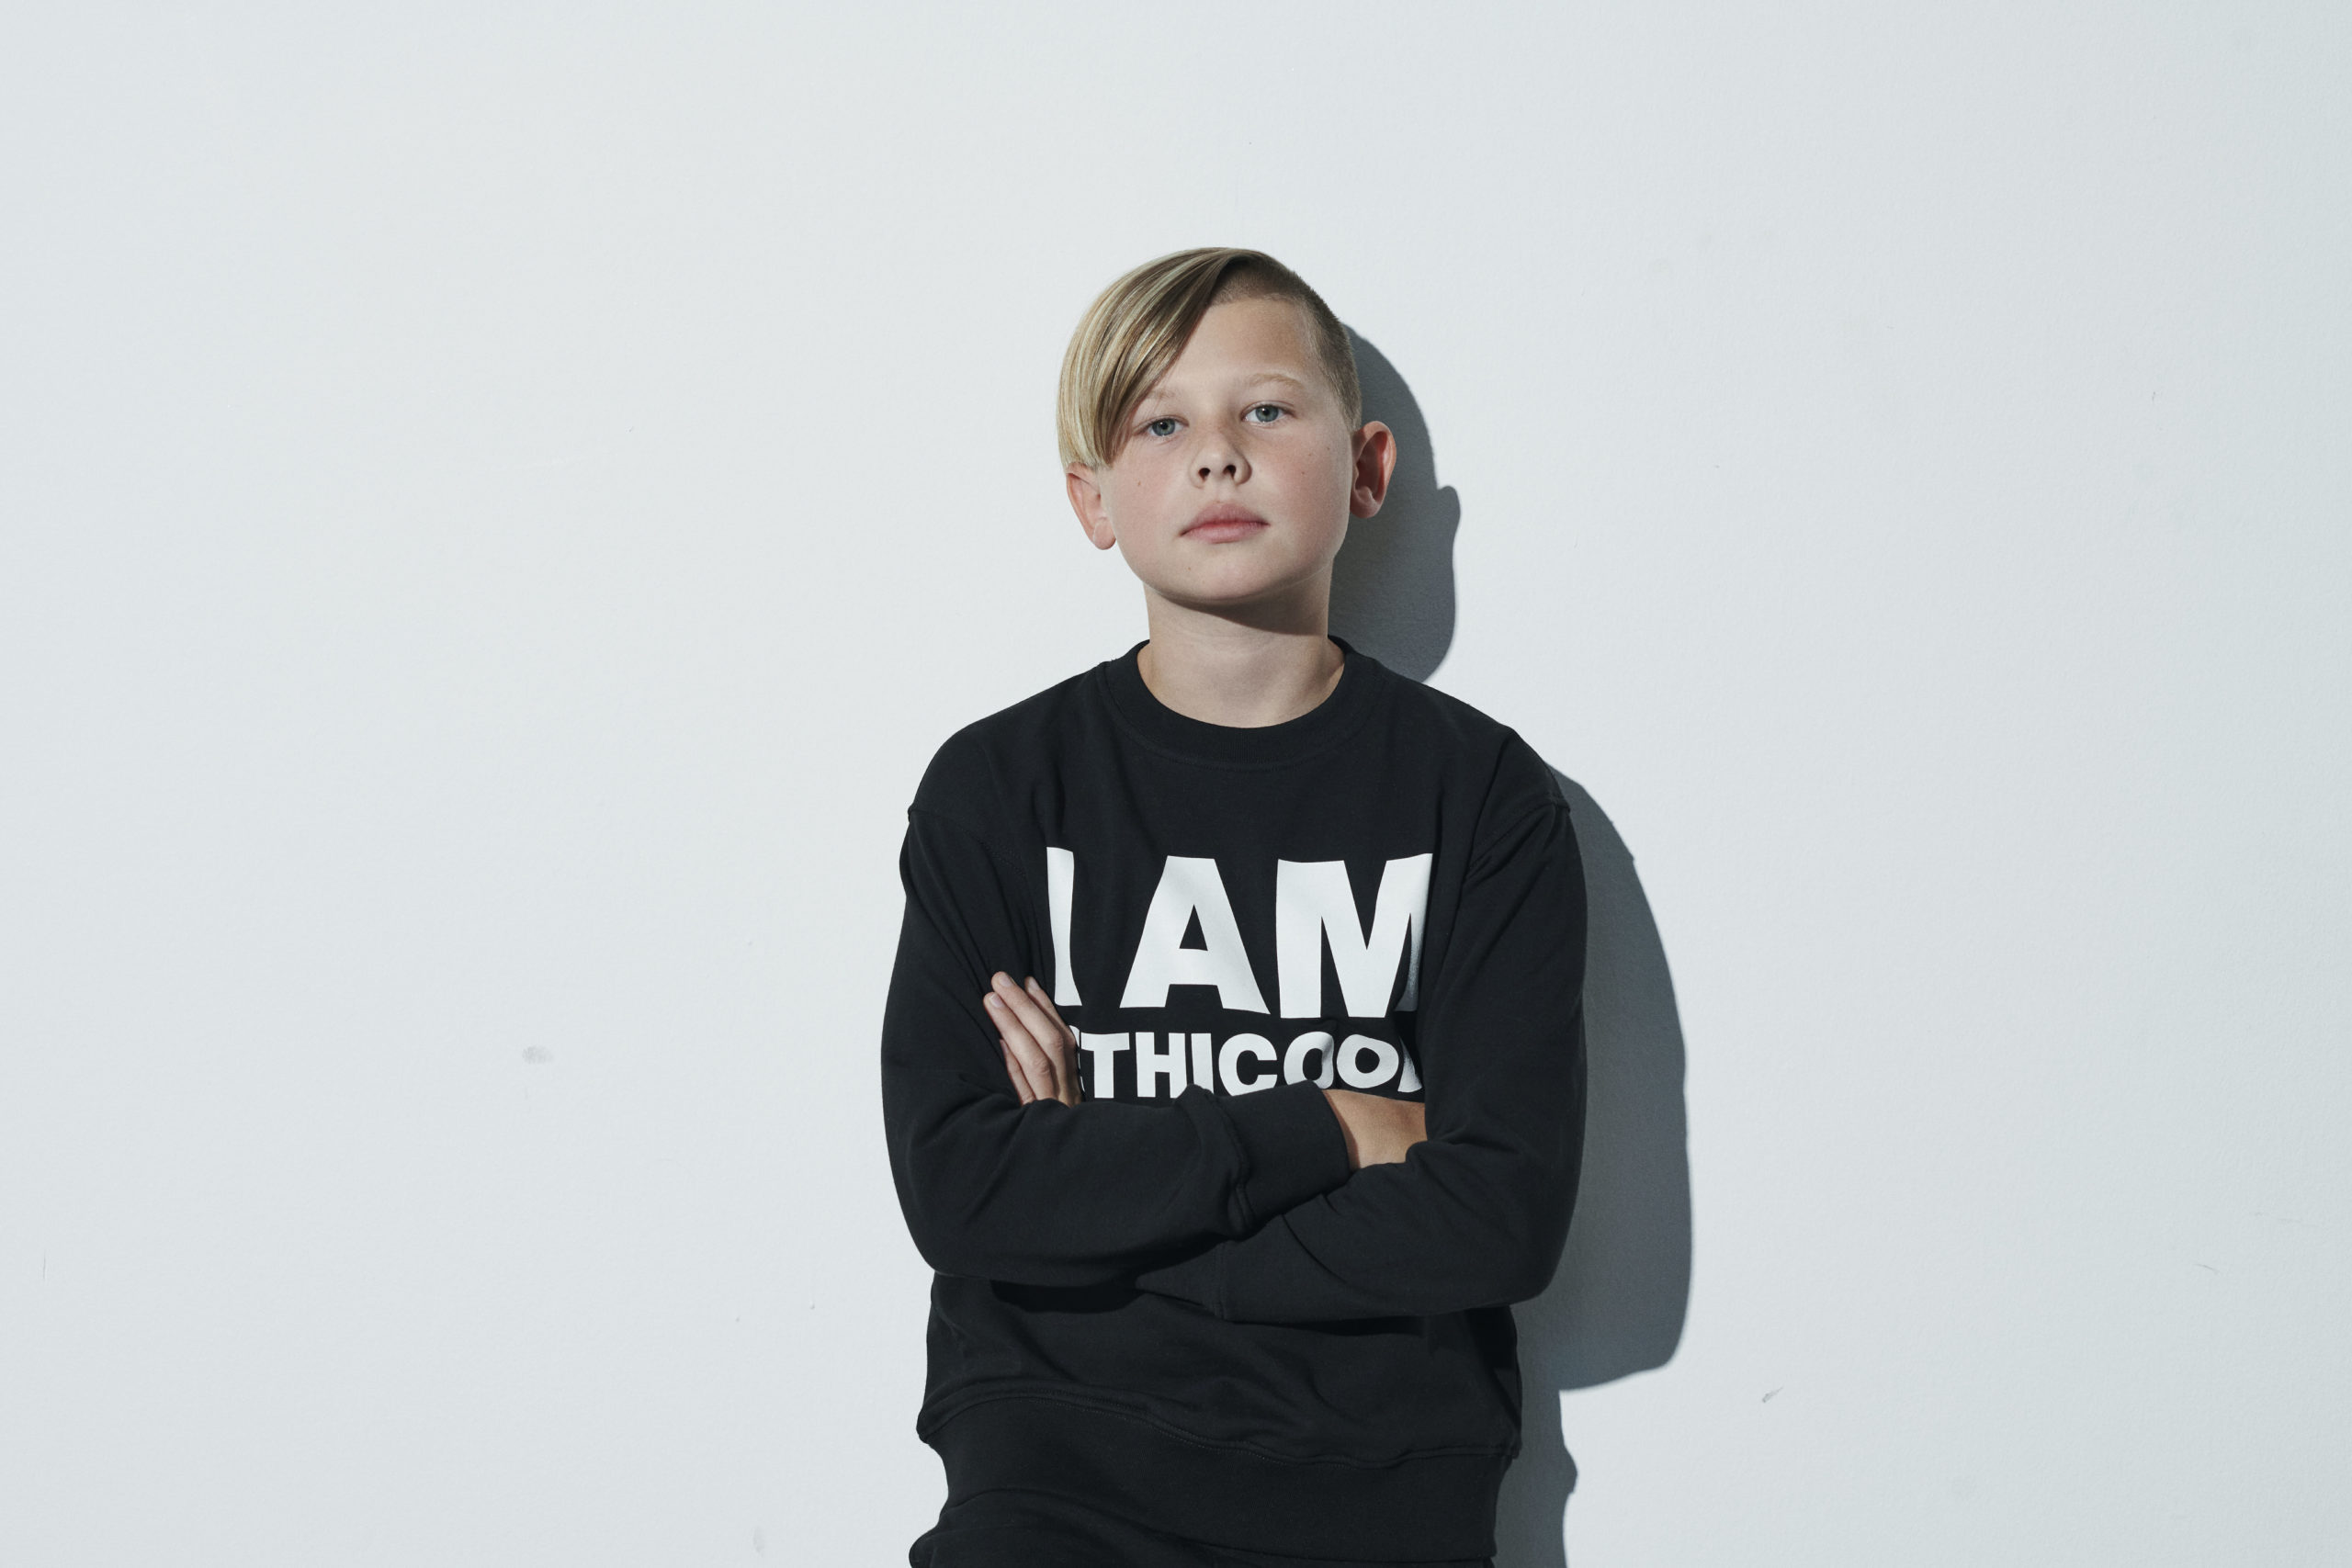 'I am ethicool' The Danish kids brand New Generals relaunches for FW2020